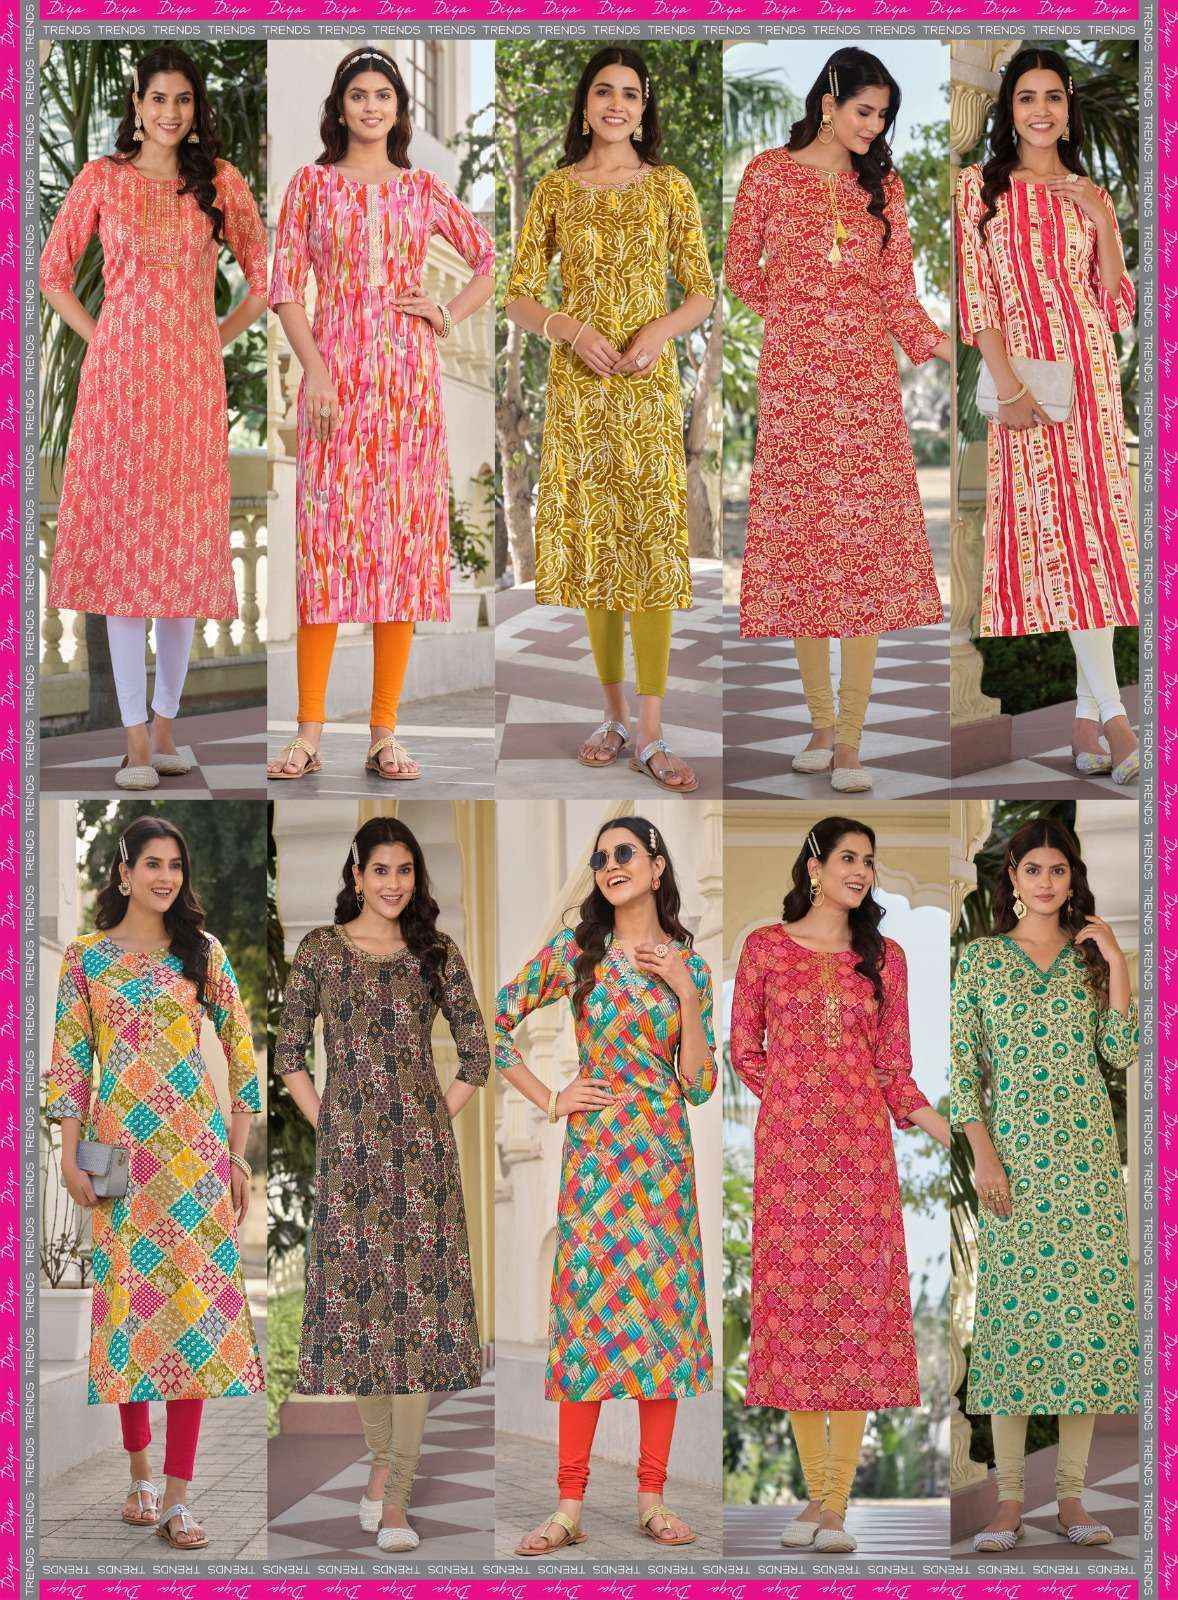 Agalya's new trends collections